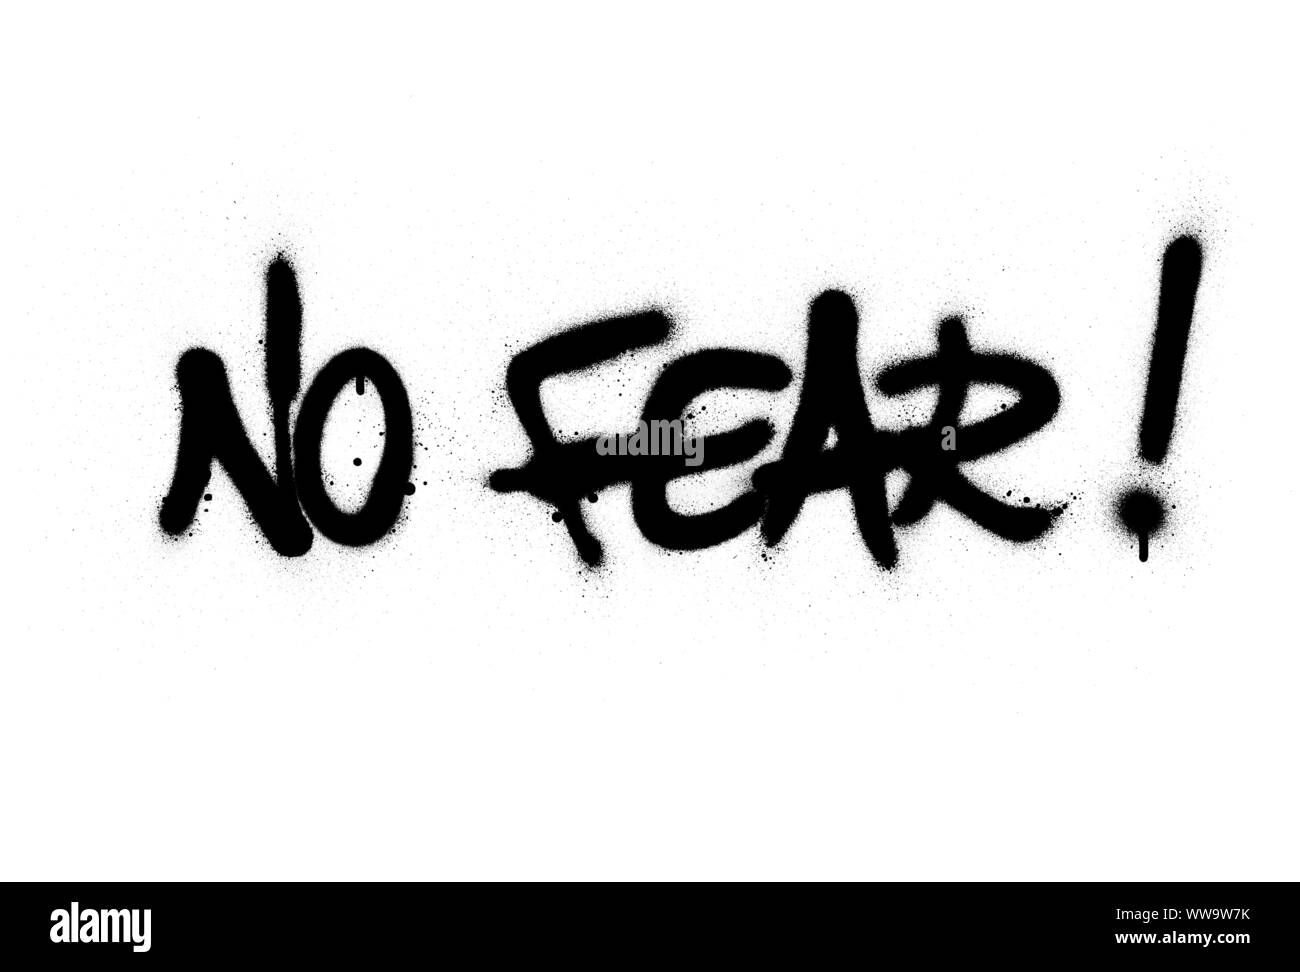 graffiti no fear text sprayed in black over white Stock Vector